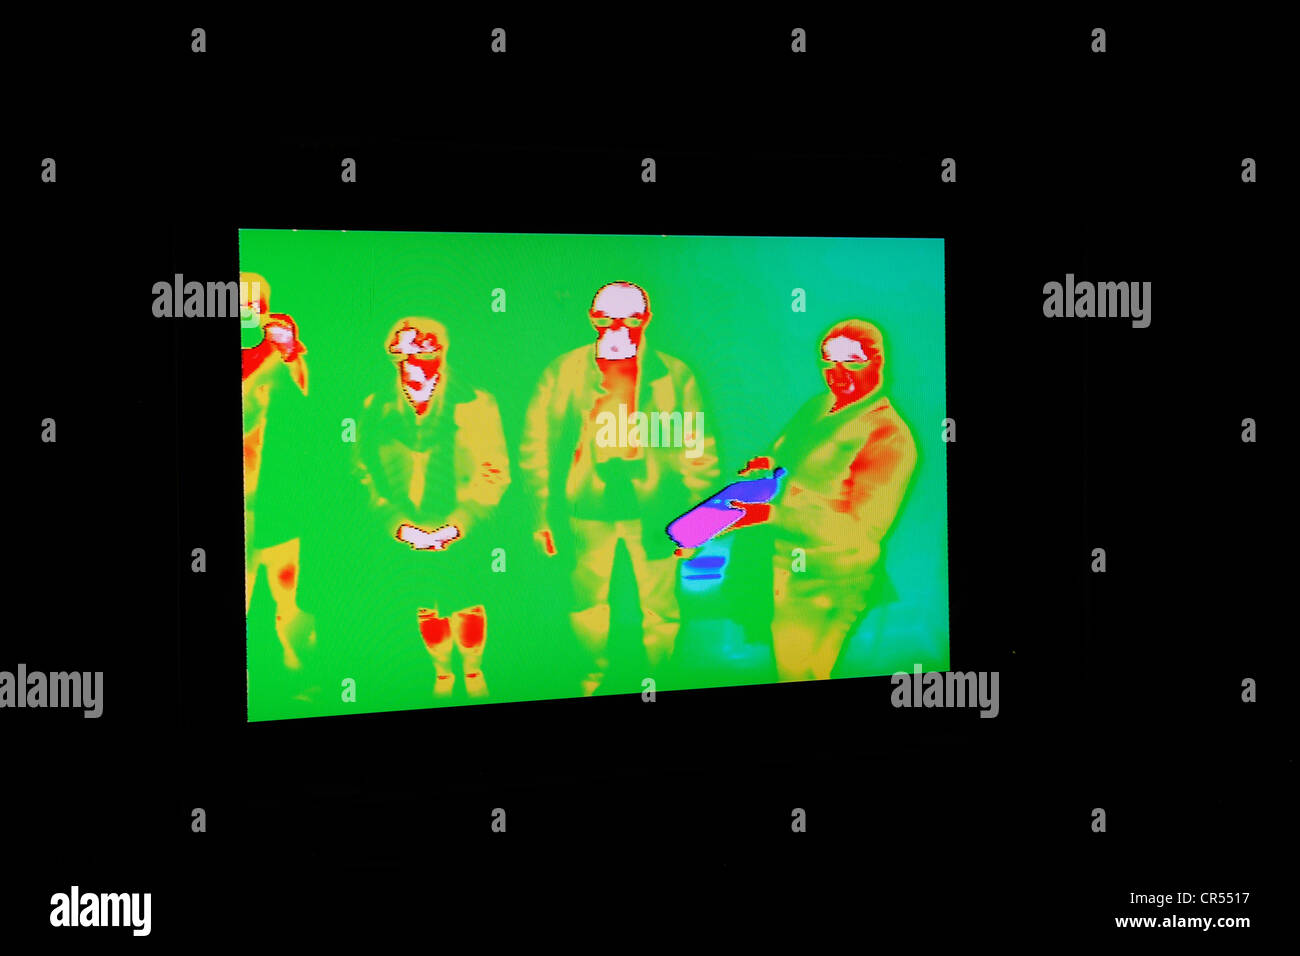 Thermographic image registers infrared heat signature.  Hotter areas appear red, cooler blue. Stock Photo